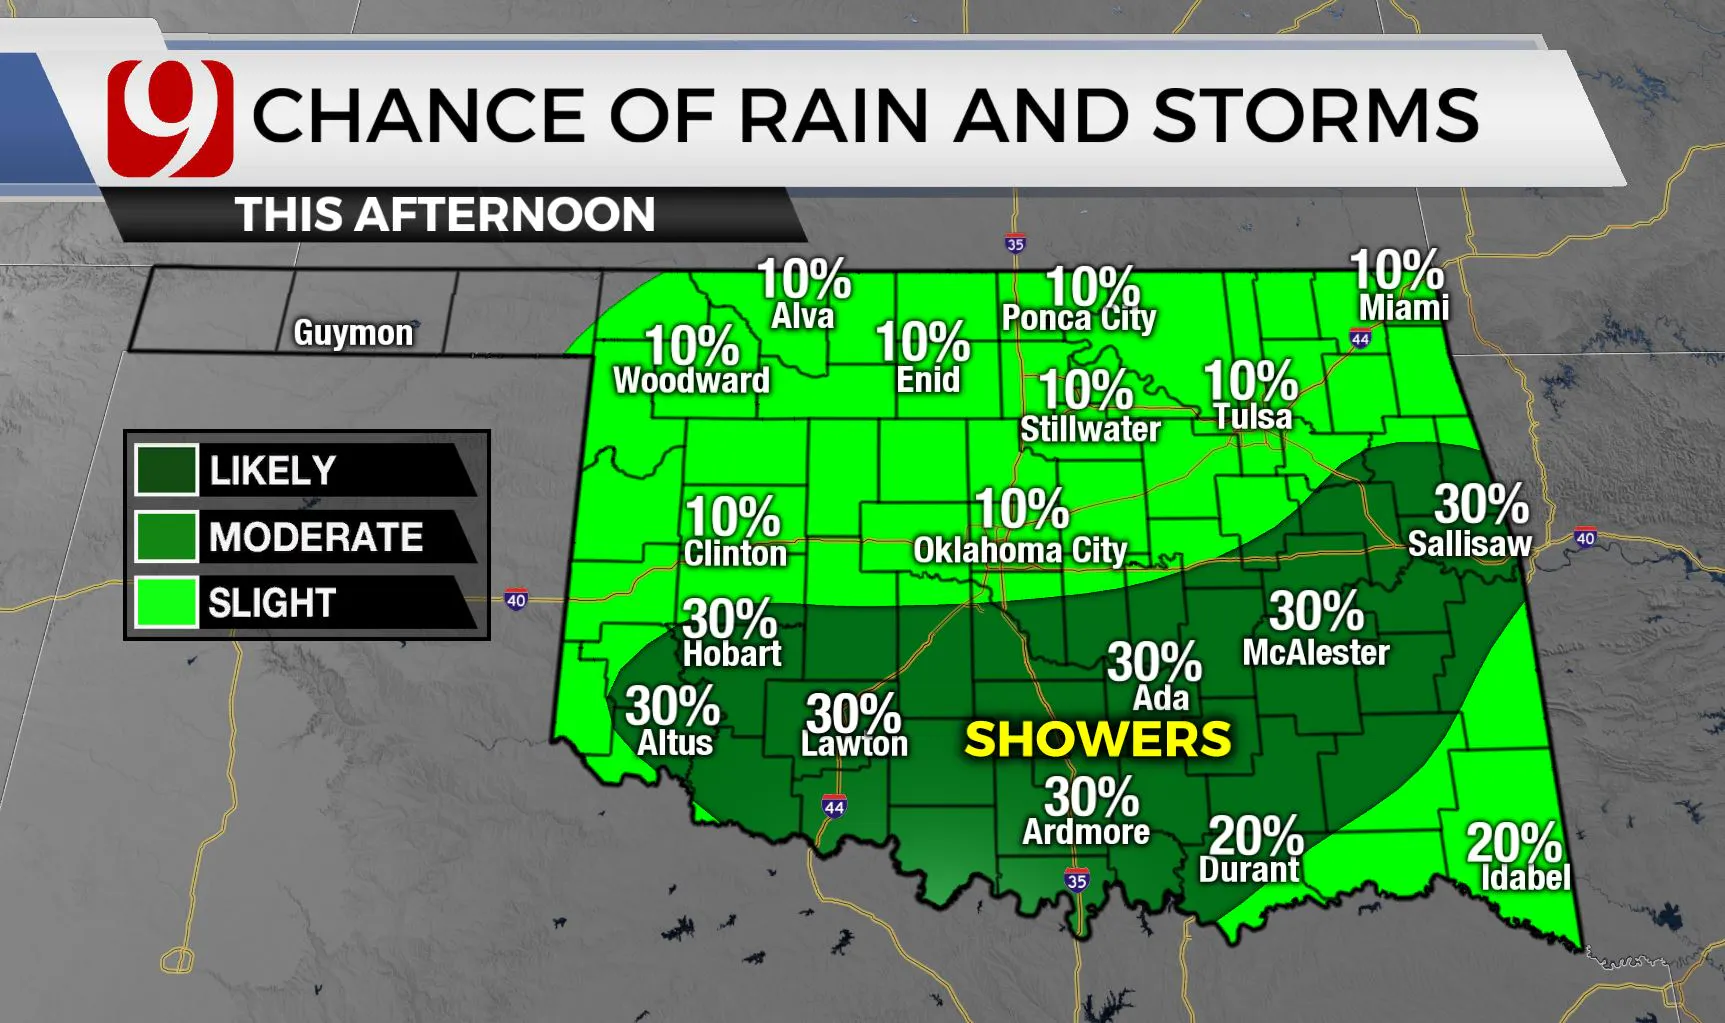 Chances of rain and storms this afternoon.